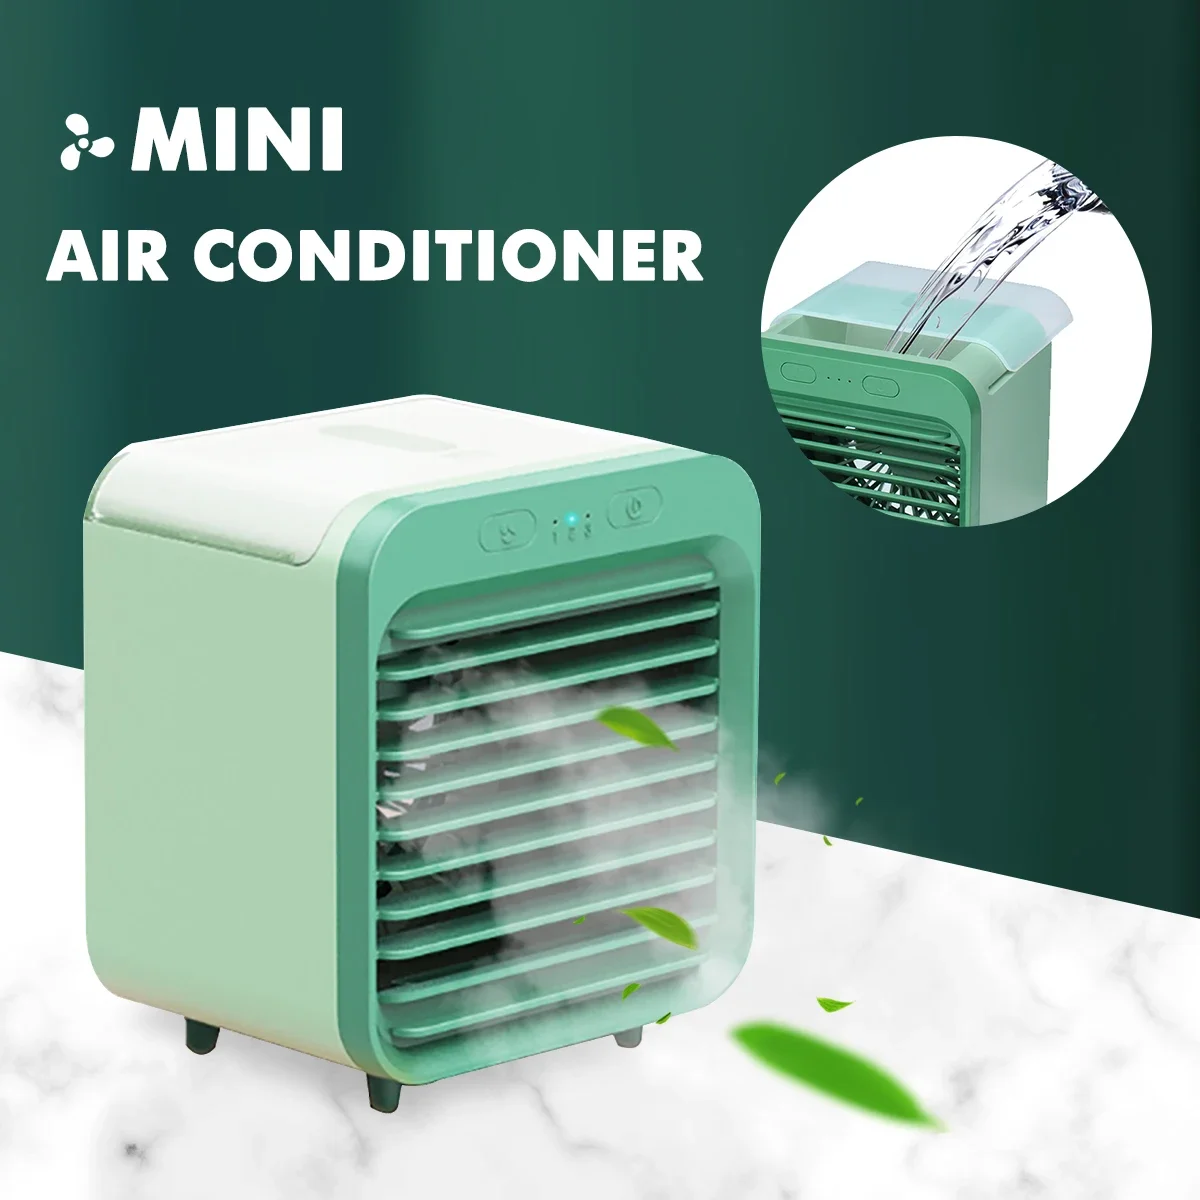 

Mini Portable USB Air Conditioner Cooling Desktop Humidifier with Water Tank Household 3 Speeds Cooling Fan Air Conditioning 5V